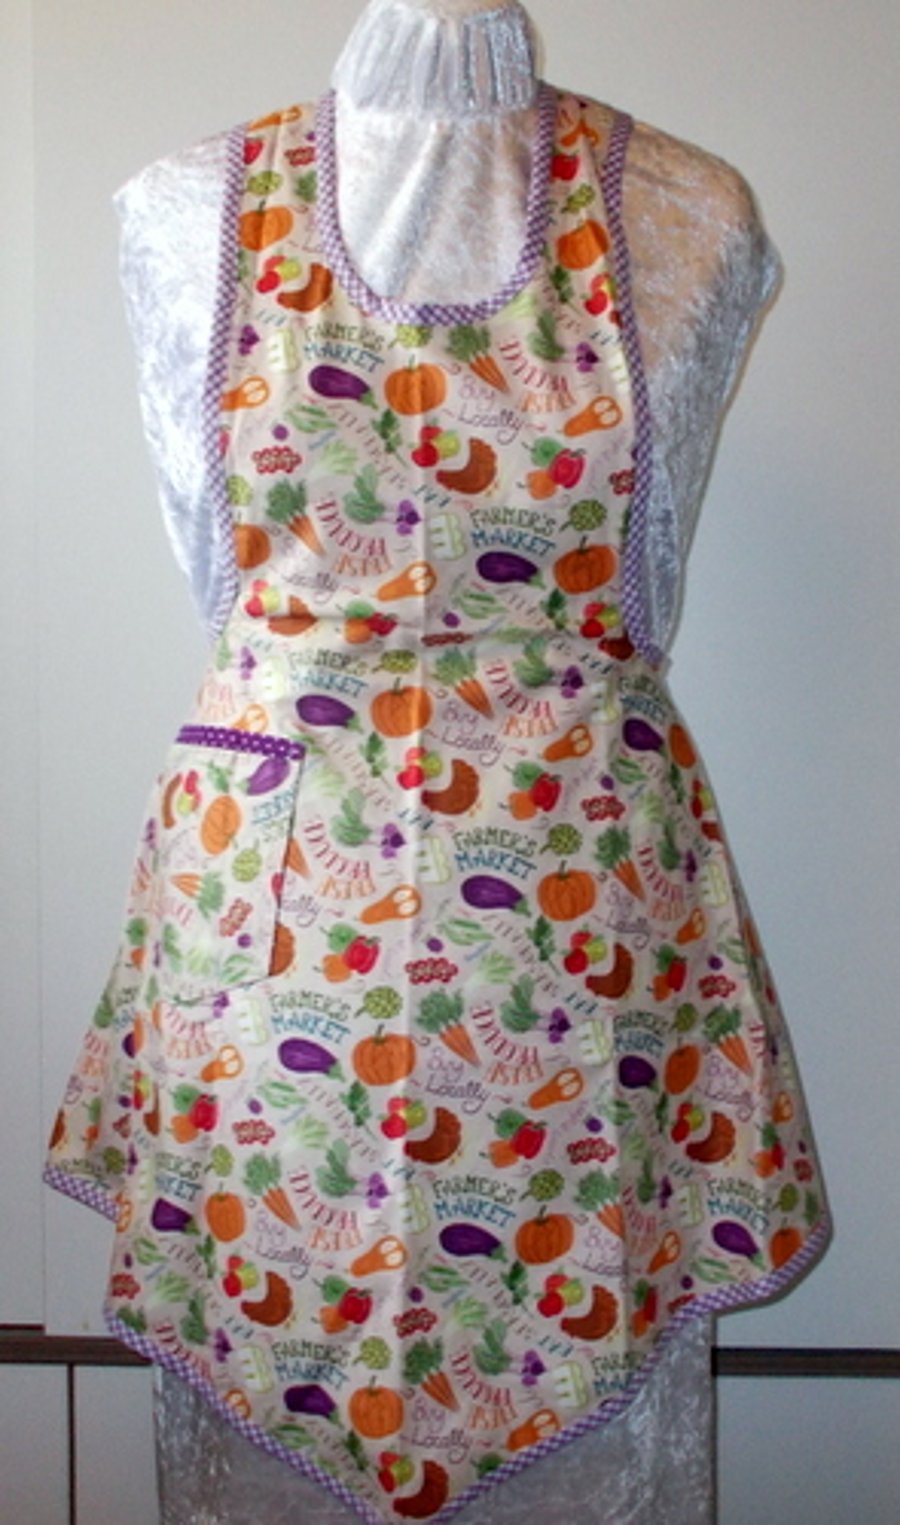 Hand made vintage style apron with print of fresh fruit and veg.